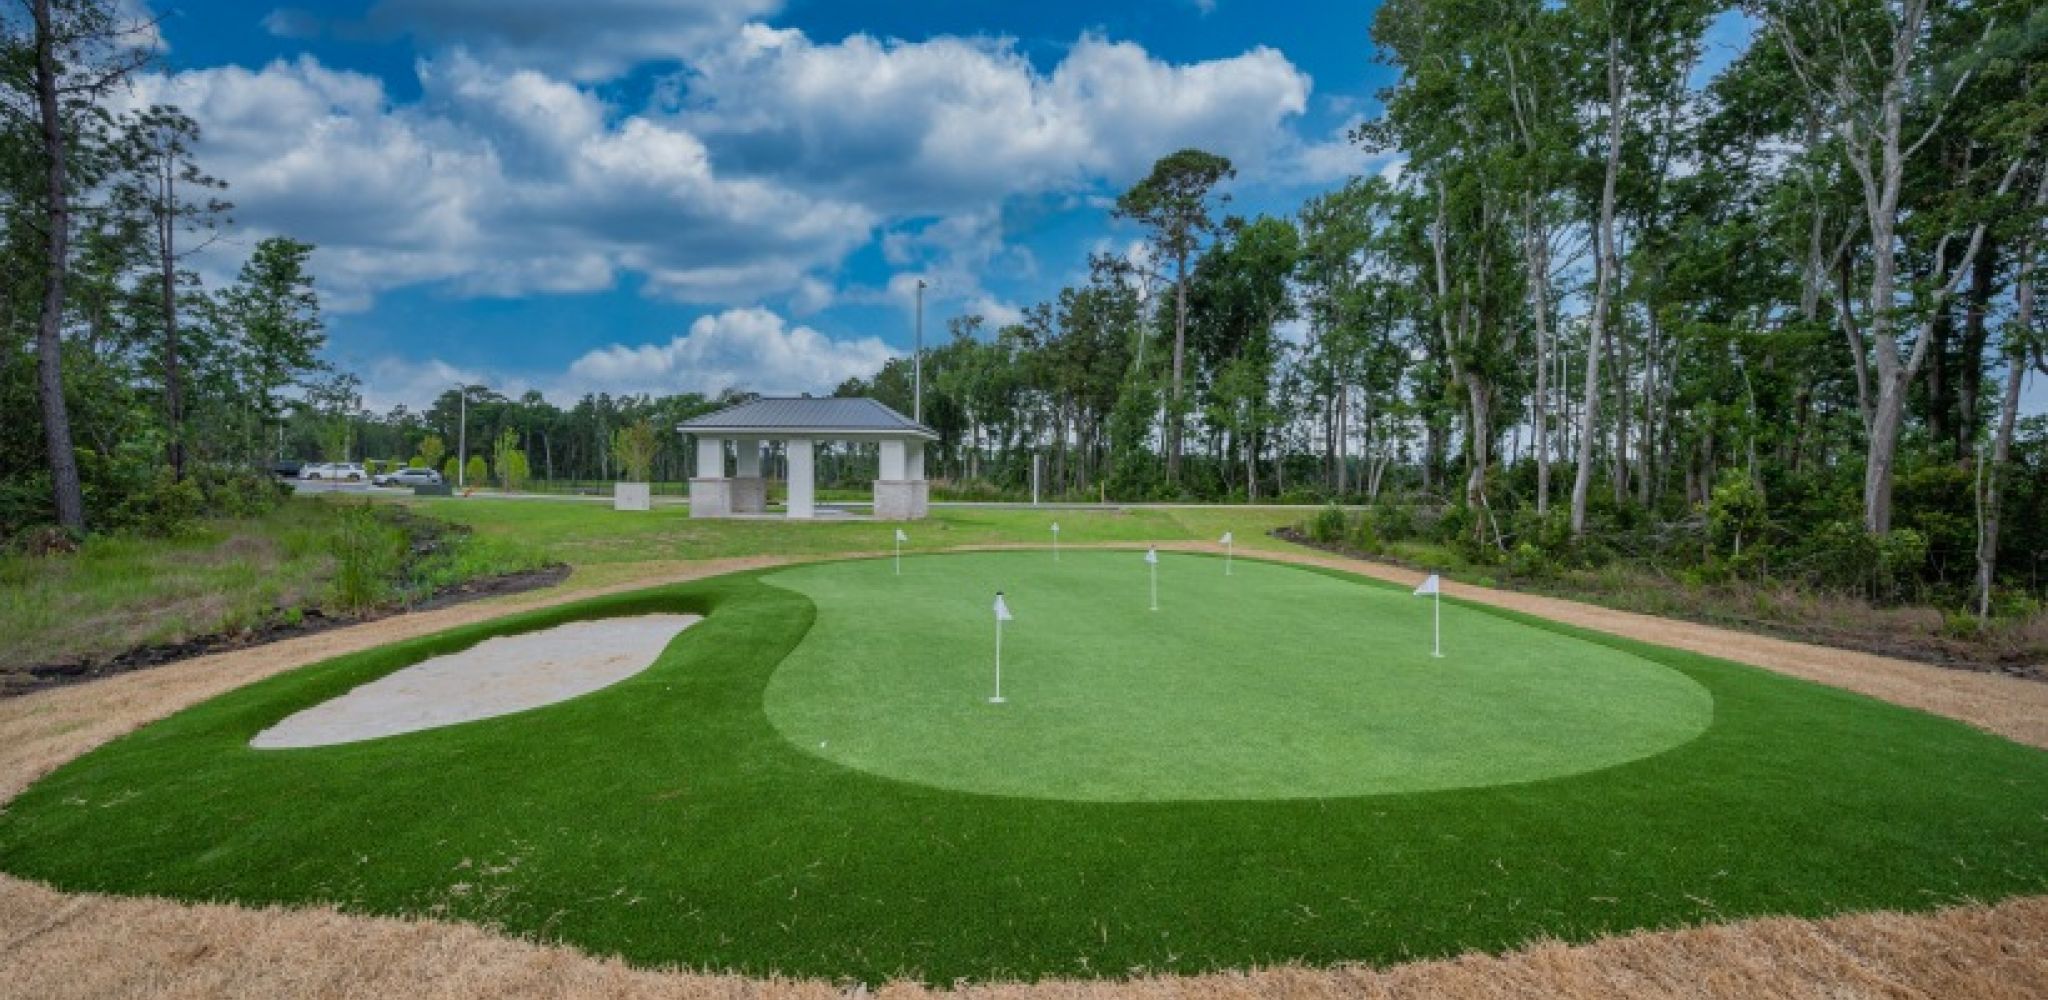 Hawthorne at Pine Forest putting green outdoor amenity area